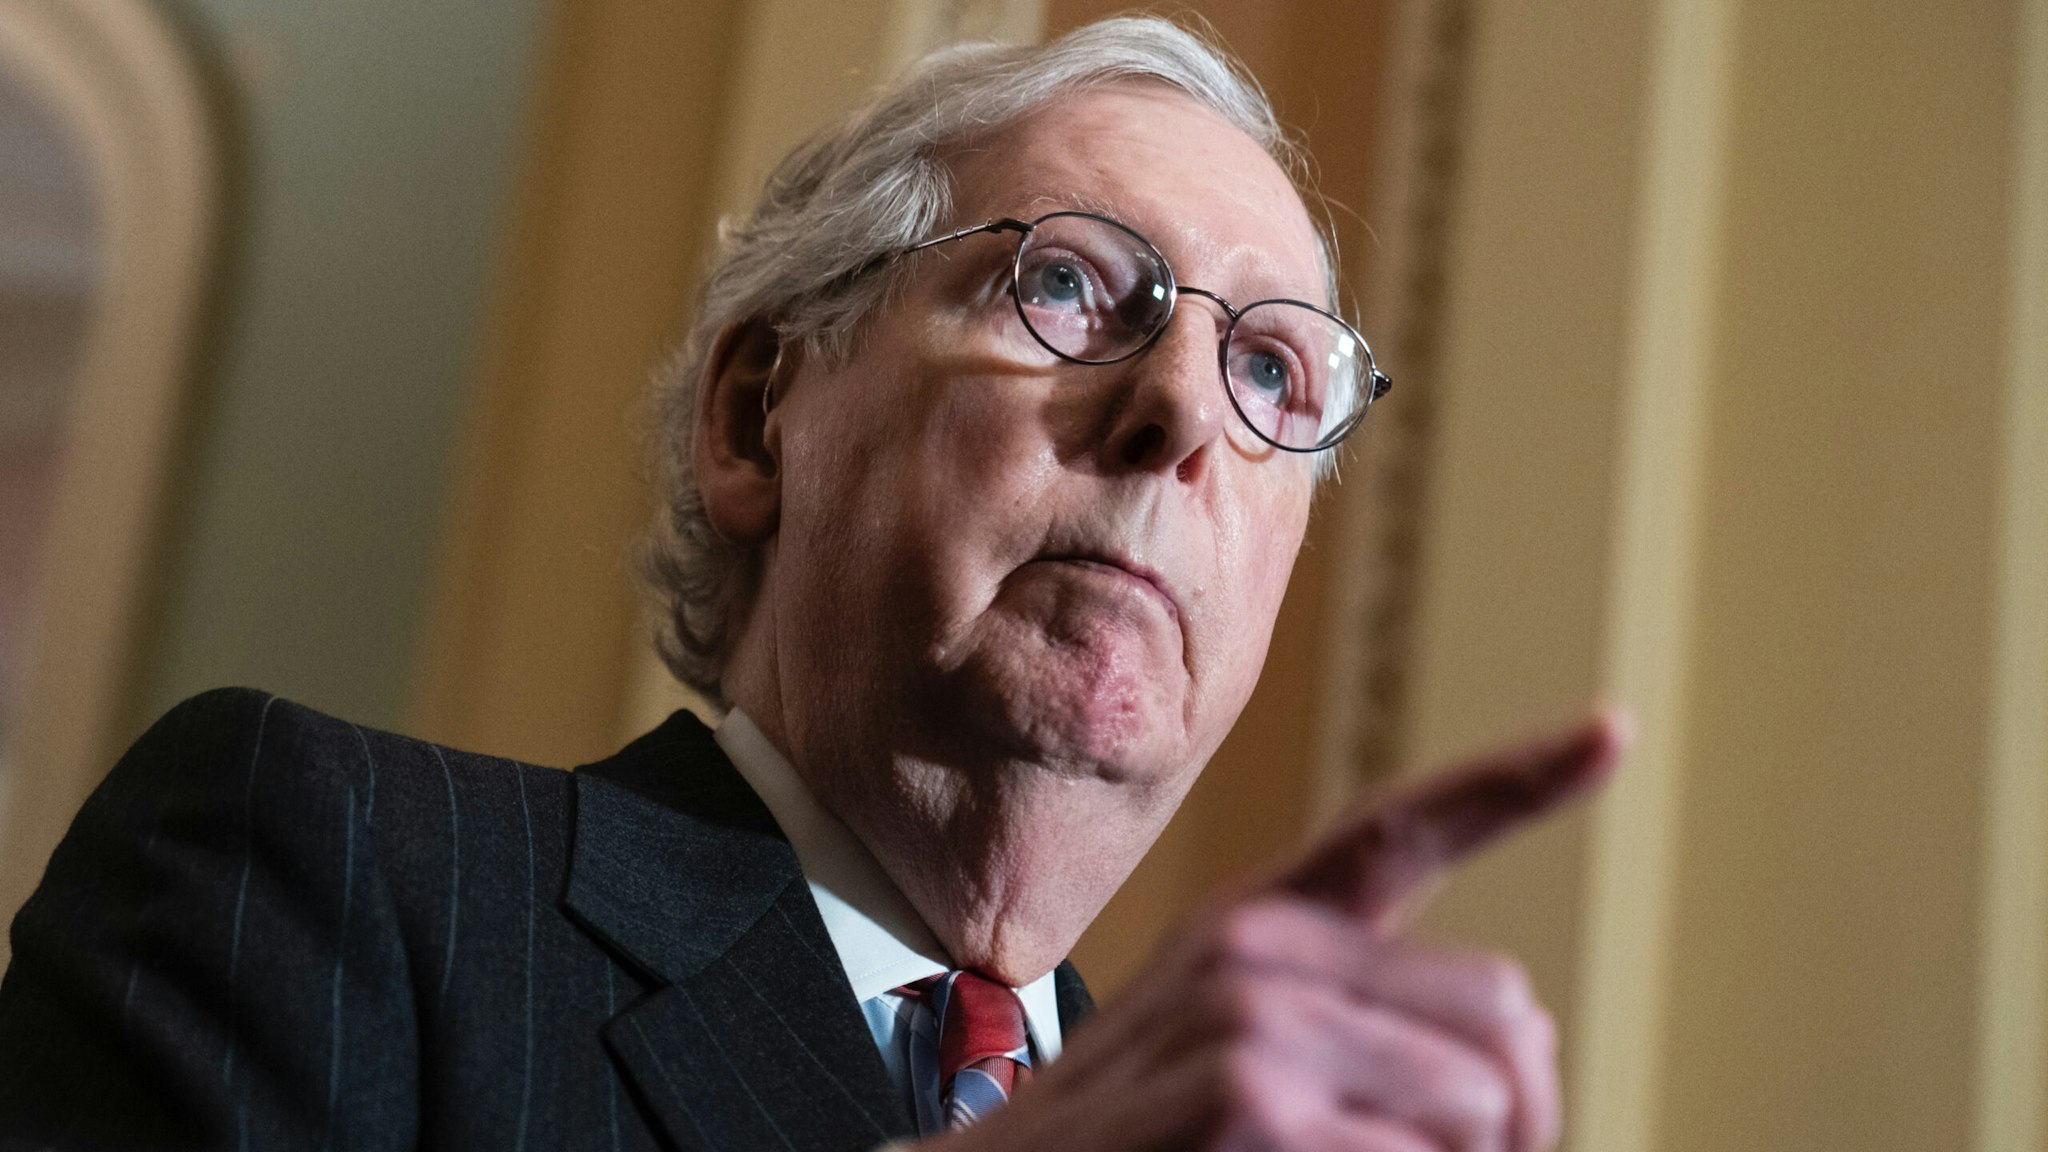 Senate Minority Leader Mitch McConnell, R-Ky., conducts a news conference after the Senate luncheons in the U.S. Capitol on Tuesday, March 8, 2022.